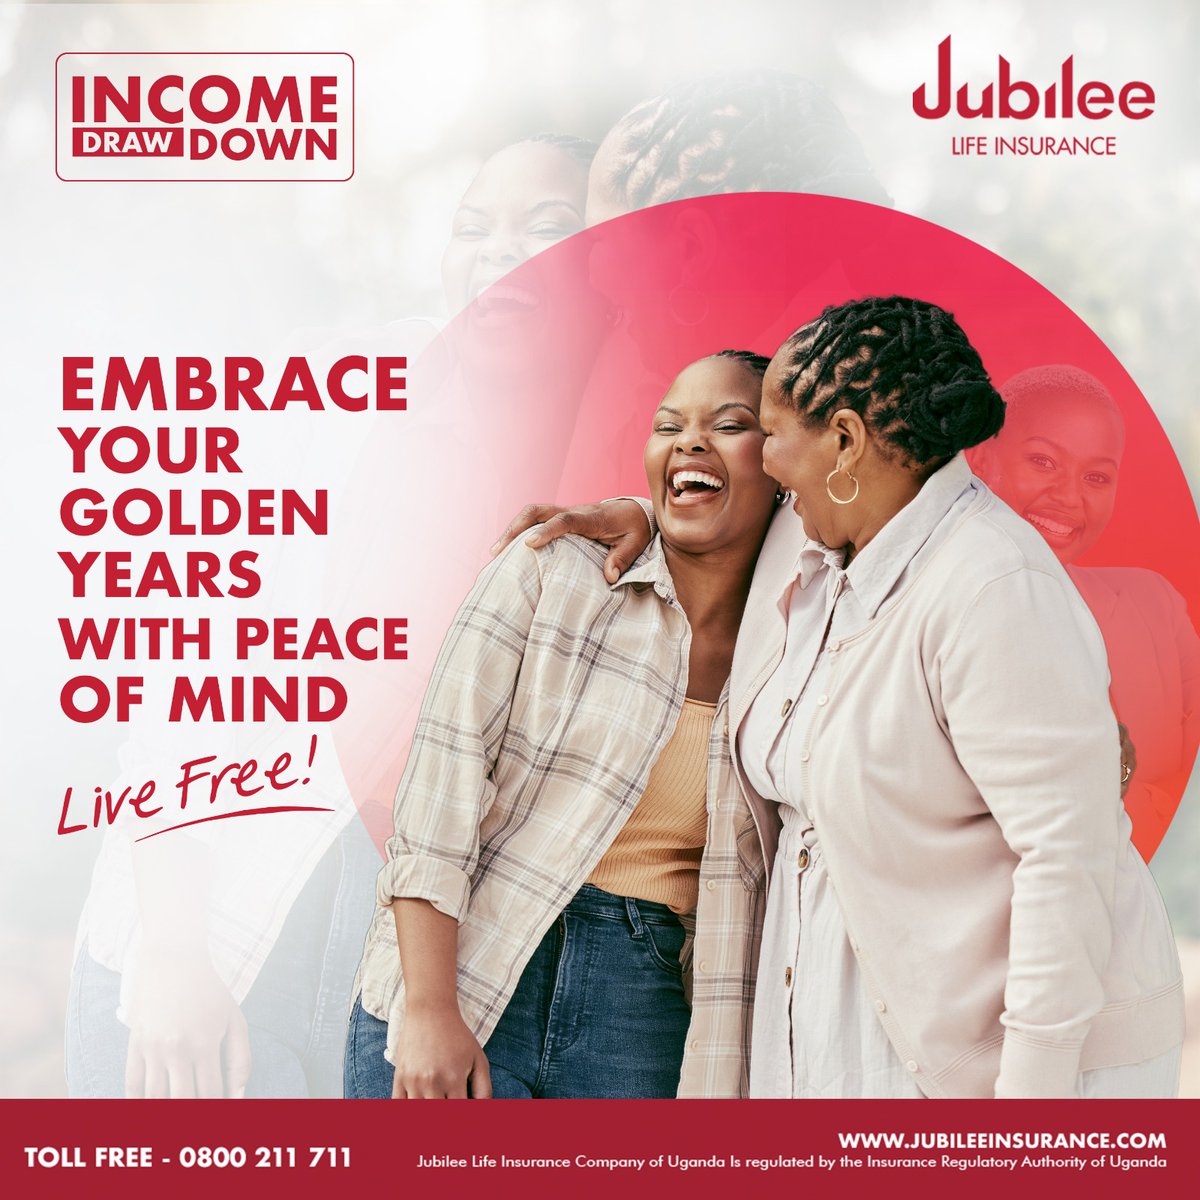 You are guaranteed a regular income in your retirement so that you can keep indulging in your hobbies even in your golden years with our Income Draw Down Policy. To learn more, please visit jubileeinsurance.com/ug/ or WhatsApp us using +256758347787.#LiveFree